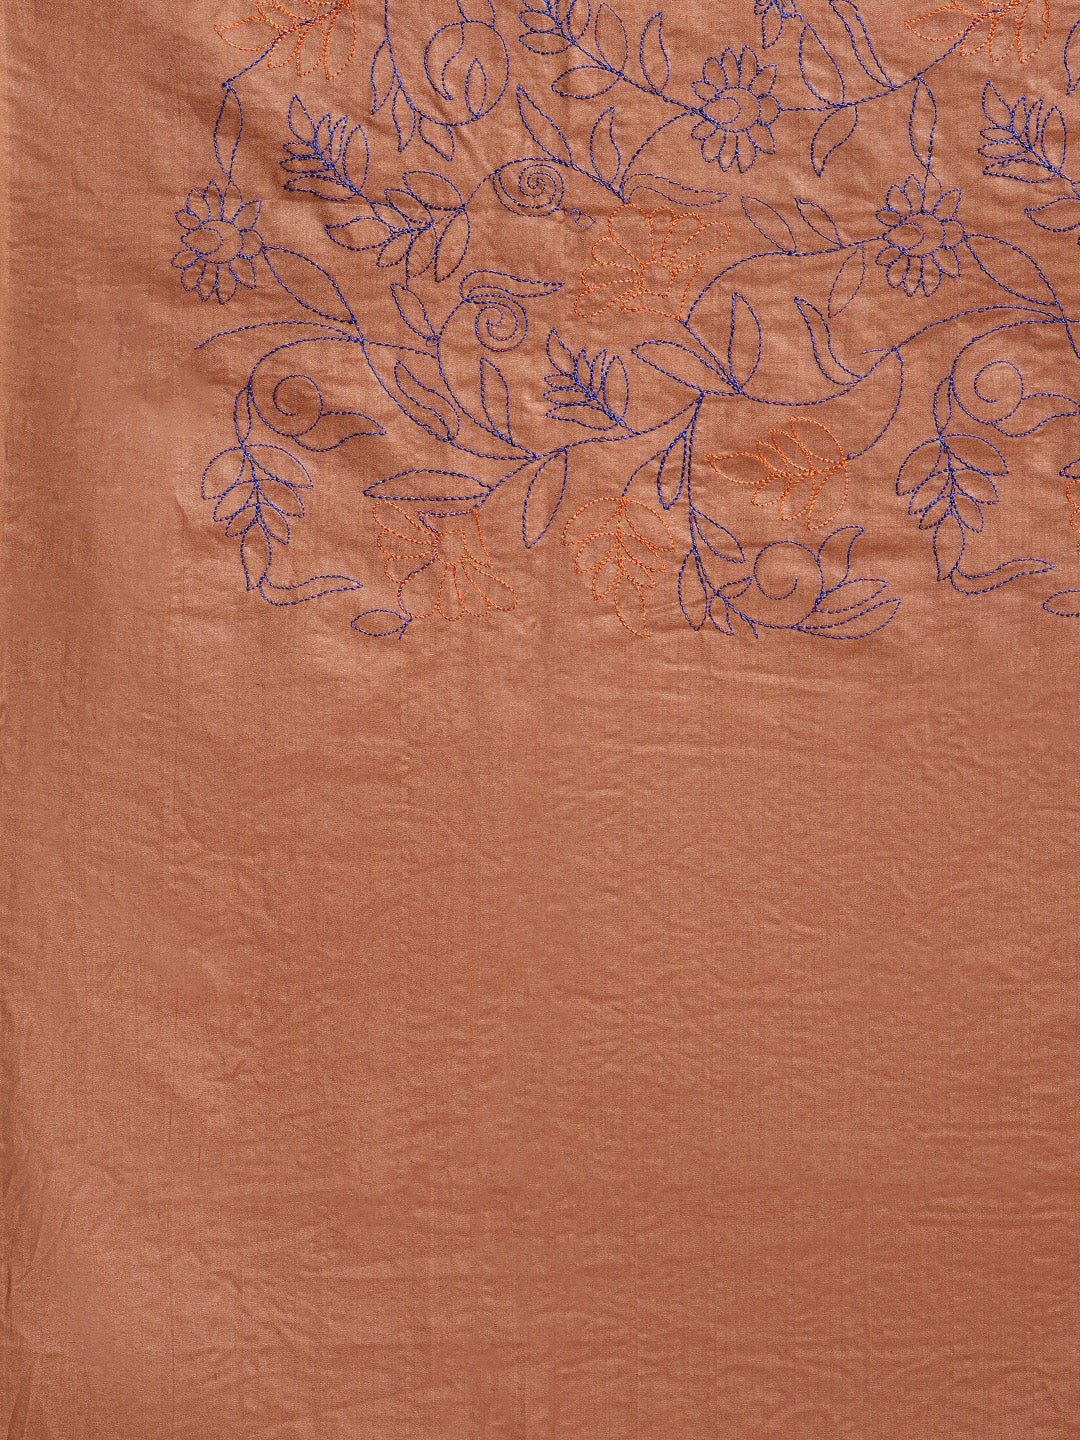 Brown and Blue, Kalakari India Bhagalpuri Silk Blend Woven Design Saree with Blouse ALBGSA0153-Saree-Kalakari India-ALBGSA0153-Bhagalpuri, Geographical Indication, Hand Crafted, Heritage Prints, Jute, Natural Dyes, Red, Sarees, Silk Blend, Sustainable Fabrics, Woven, Yellow-[Linen,Ethnic,wear,Fashionista,Handloom,Handicraft,Indigo,blockprint,block,print,Cotton,Chanderi,Blue, latest,classy,party,bollywood,trendy,summer,style,traditional,formal,elegant,unique,style,hand,block,print, dabu,booti,gif